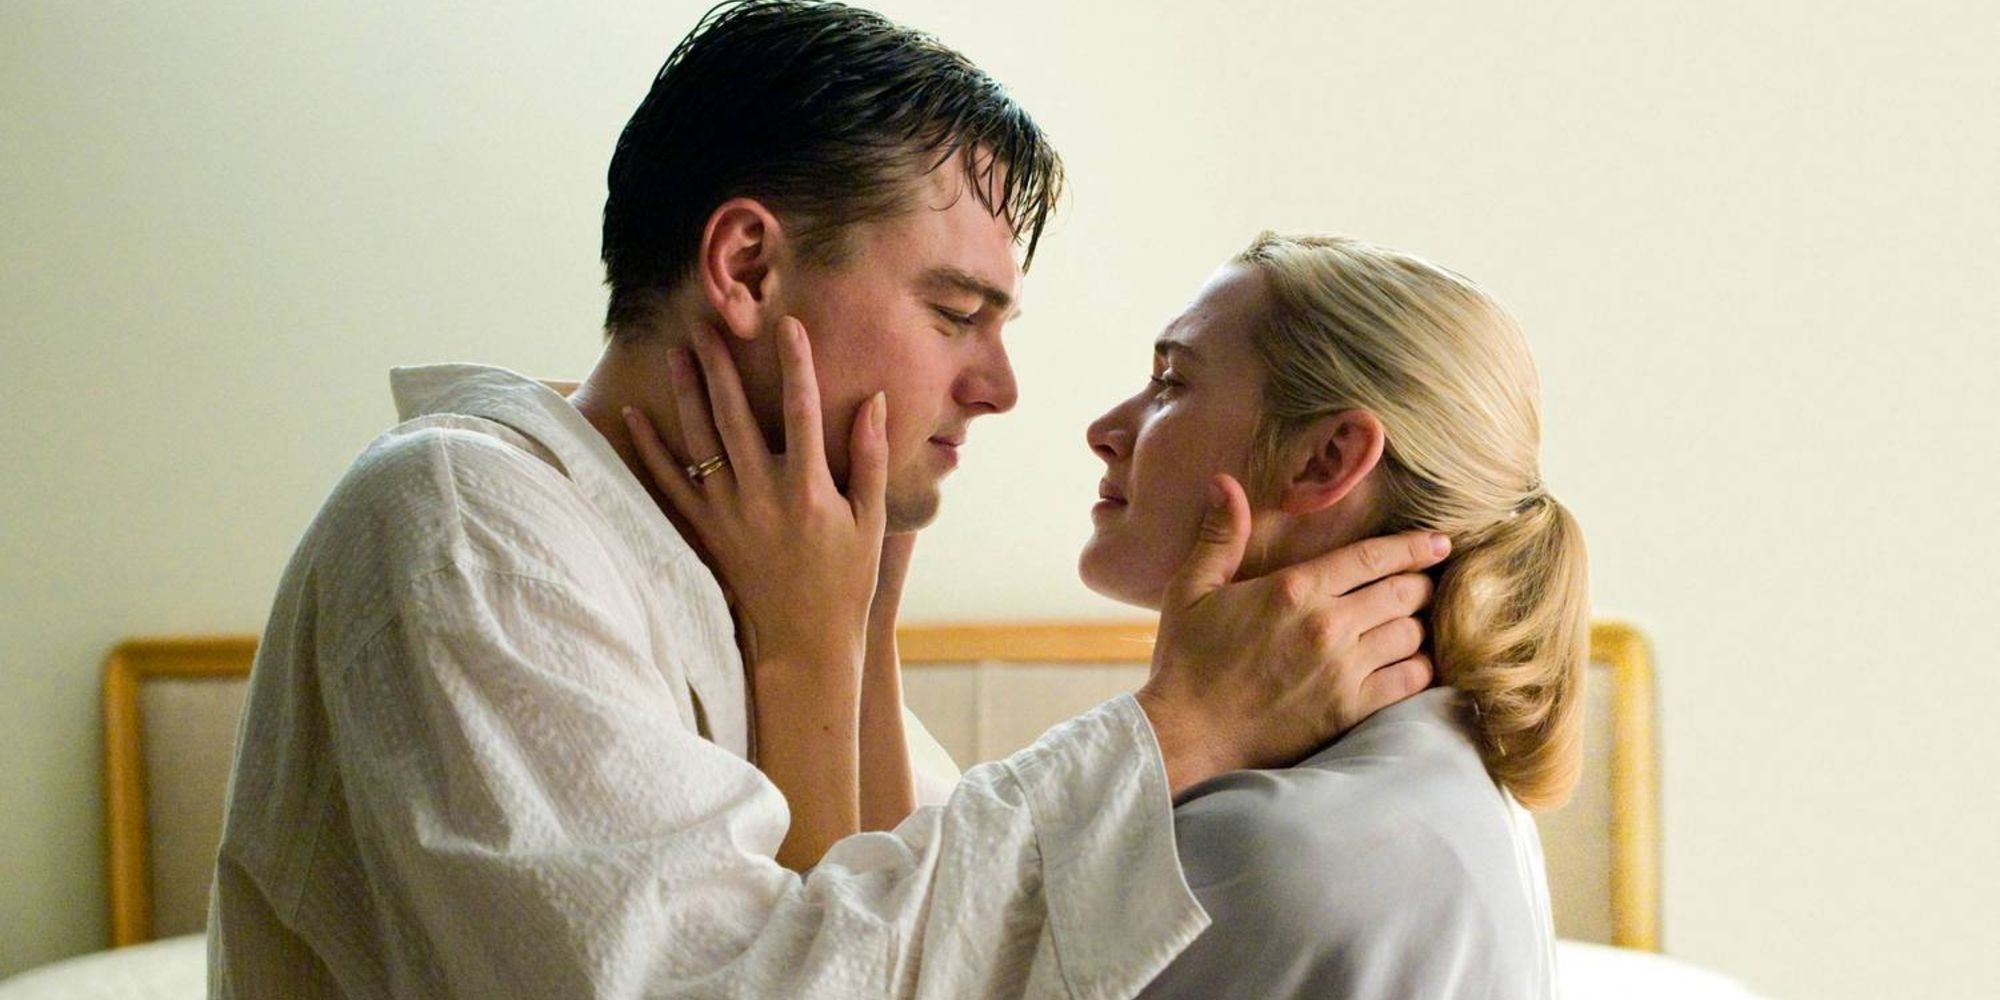 Kate Winslet & Leonardo DiCaprio 5 Ways Their Onscreen Love Is Stronger On Revolutionary Road (5 Ways Its On Titanic)